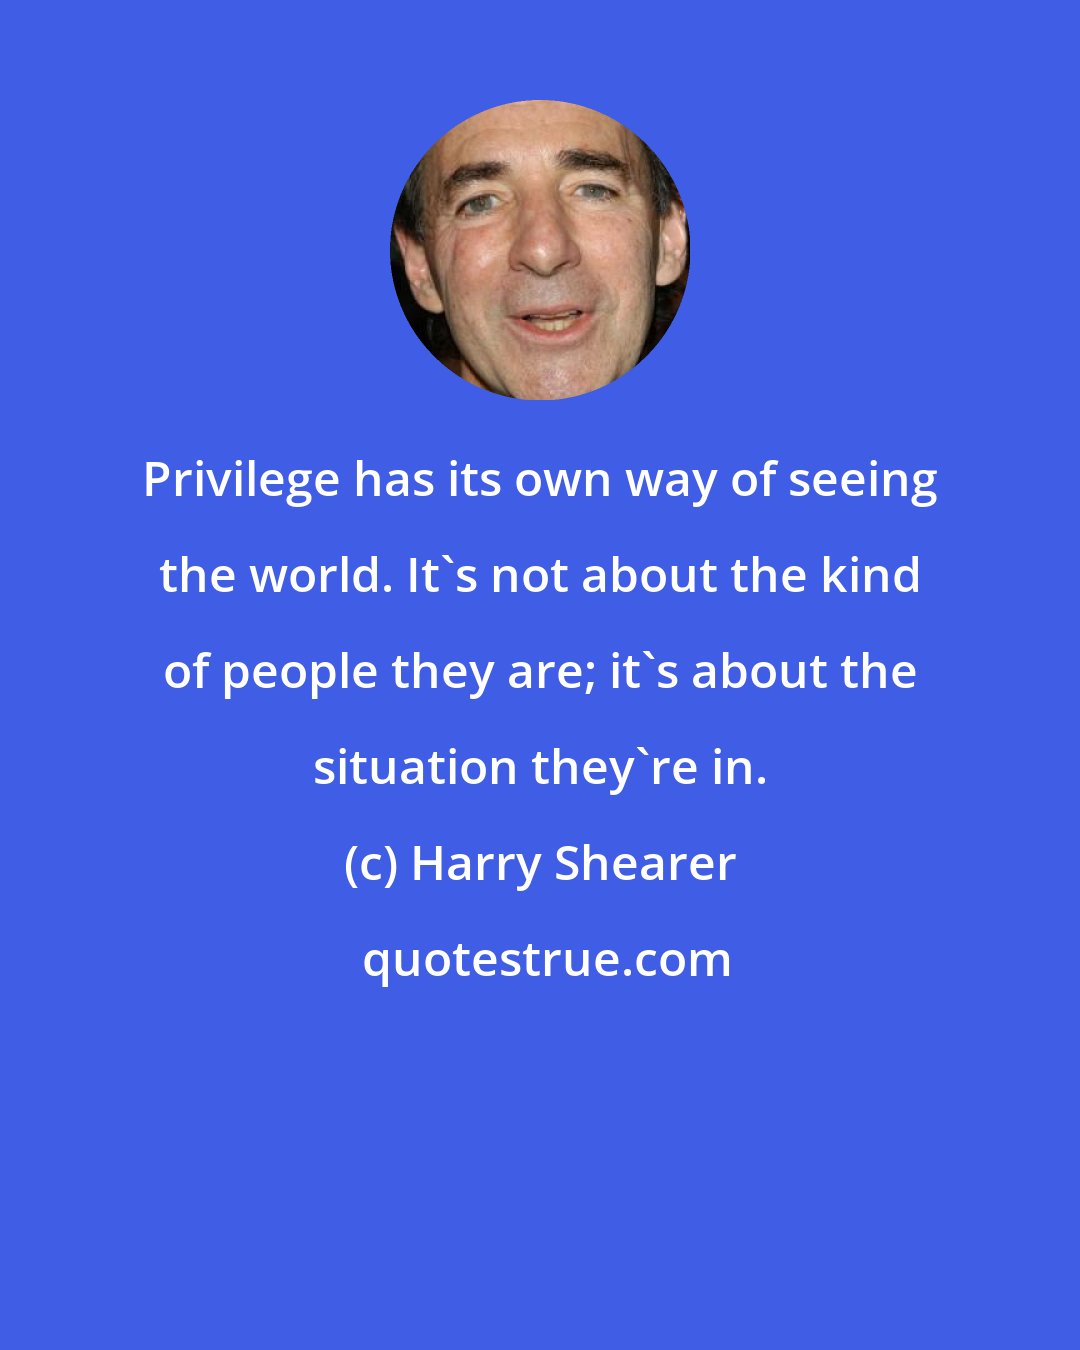 Harry Shearer: Privilege has its own way of seeing the world. It's not about the kind of people they are; it's about the situation they're in.